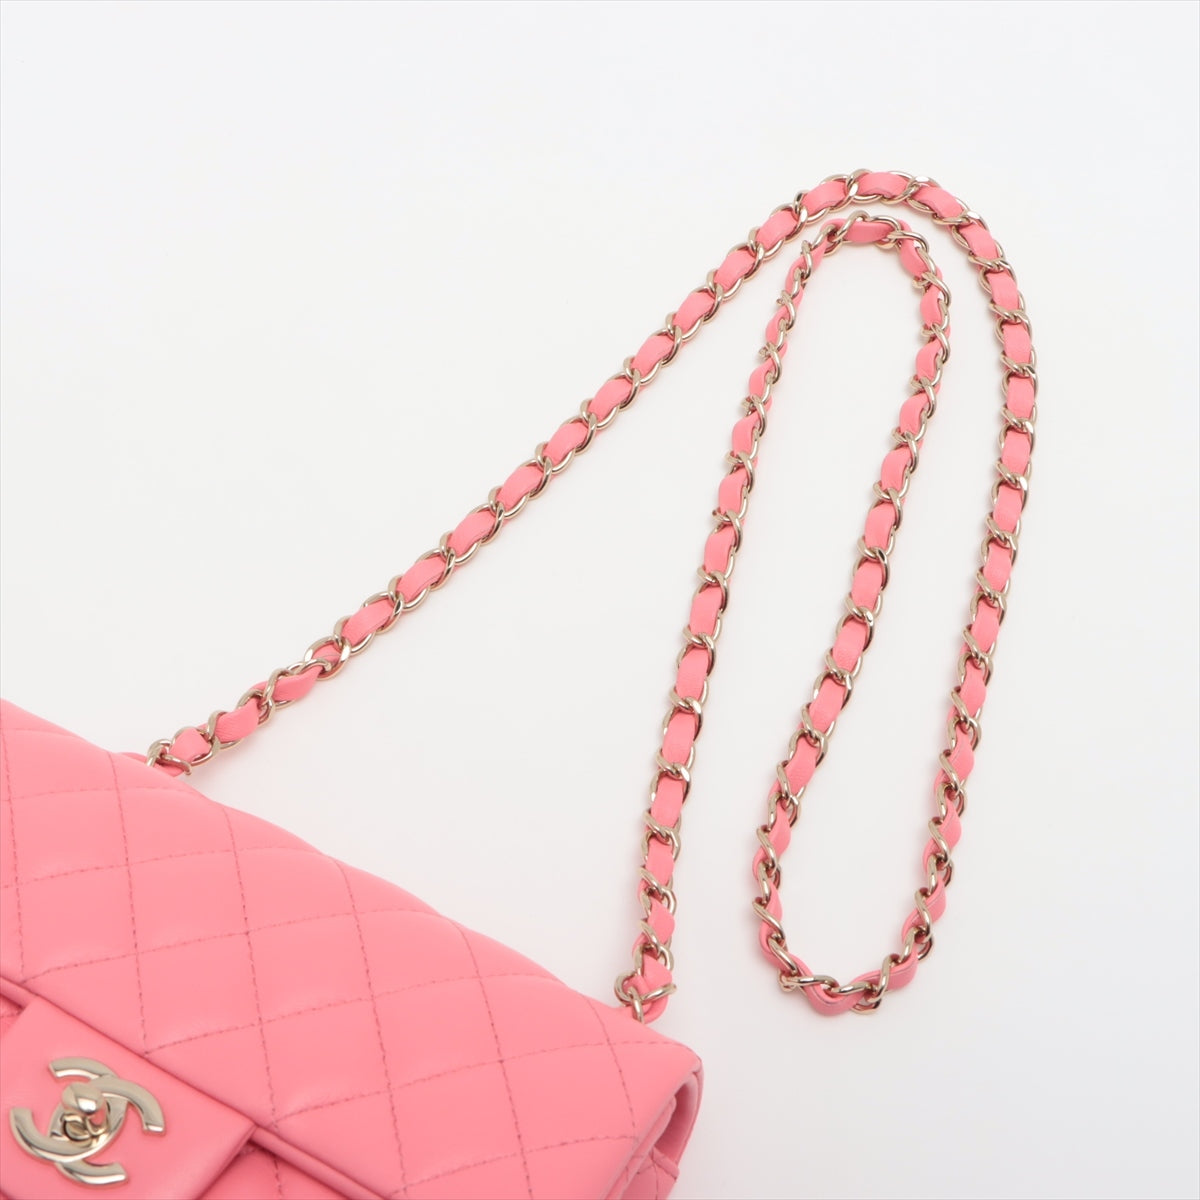 Chanel Matelasse Lambskin Single flap single chain bag Pink Gold Metal fittings There is an IC chip